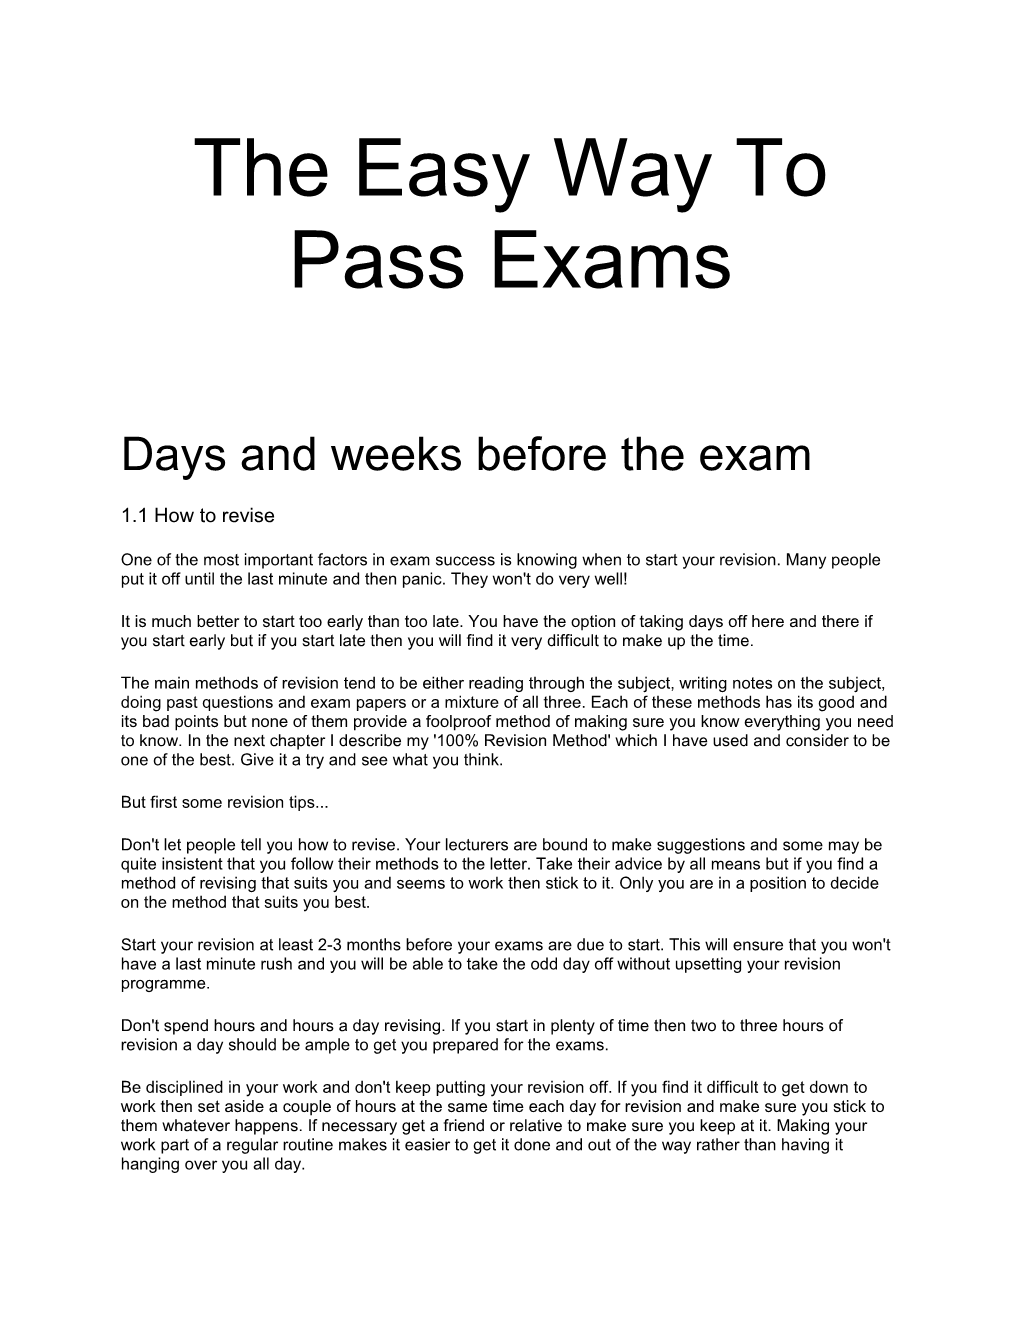 The Easy Way to Pass Exams